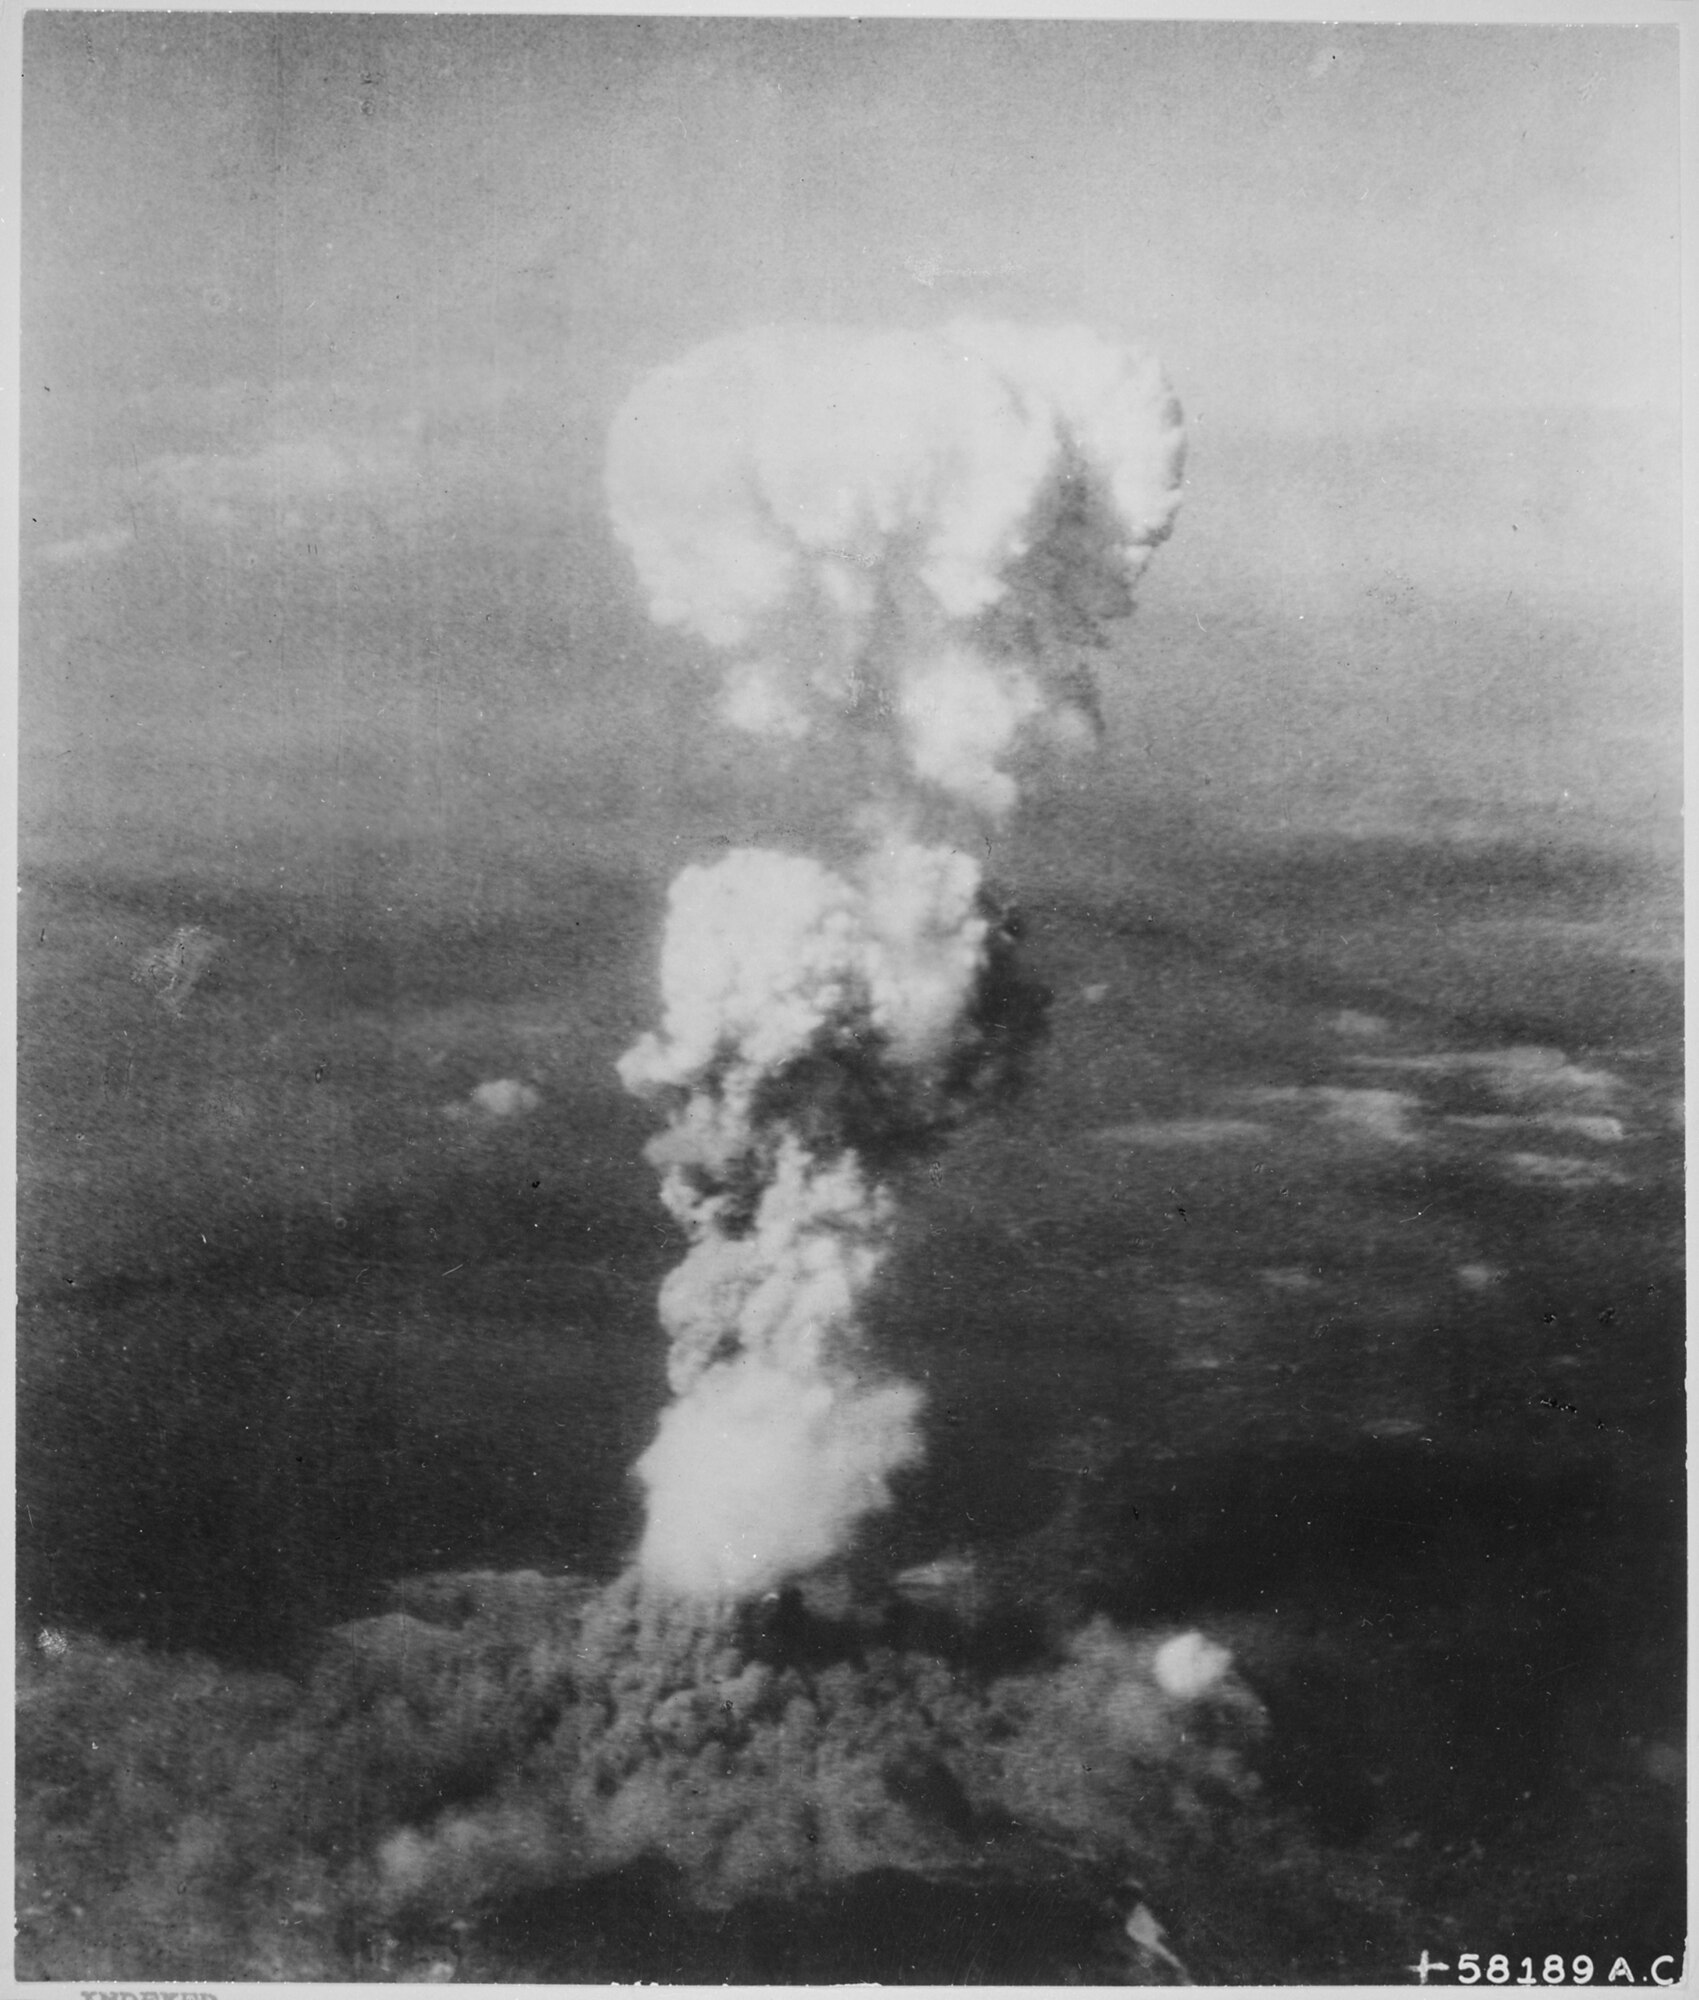 The atomic bomb, dropped by the crew of the 509th Composite Group's B-29 Superfortress Enola Gay, detonates over Hiroshima, Japan. The first of two historic drops, these missions contributed to forcing Japan to surrender, ending World War II. (U.S. Army Air Forces file photo)